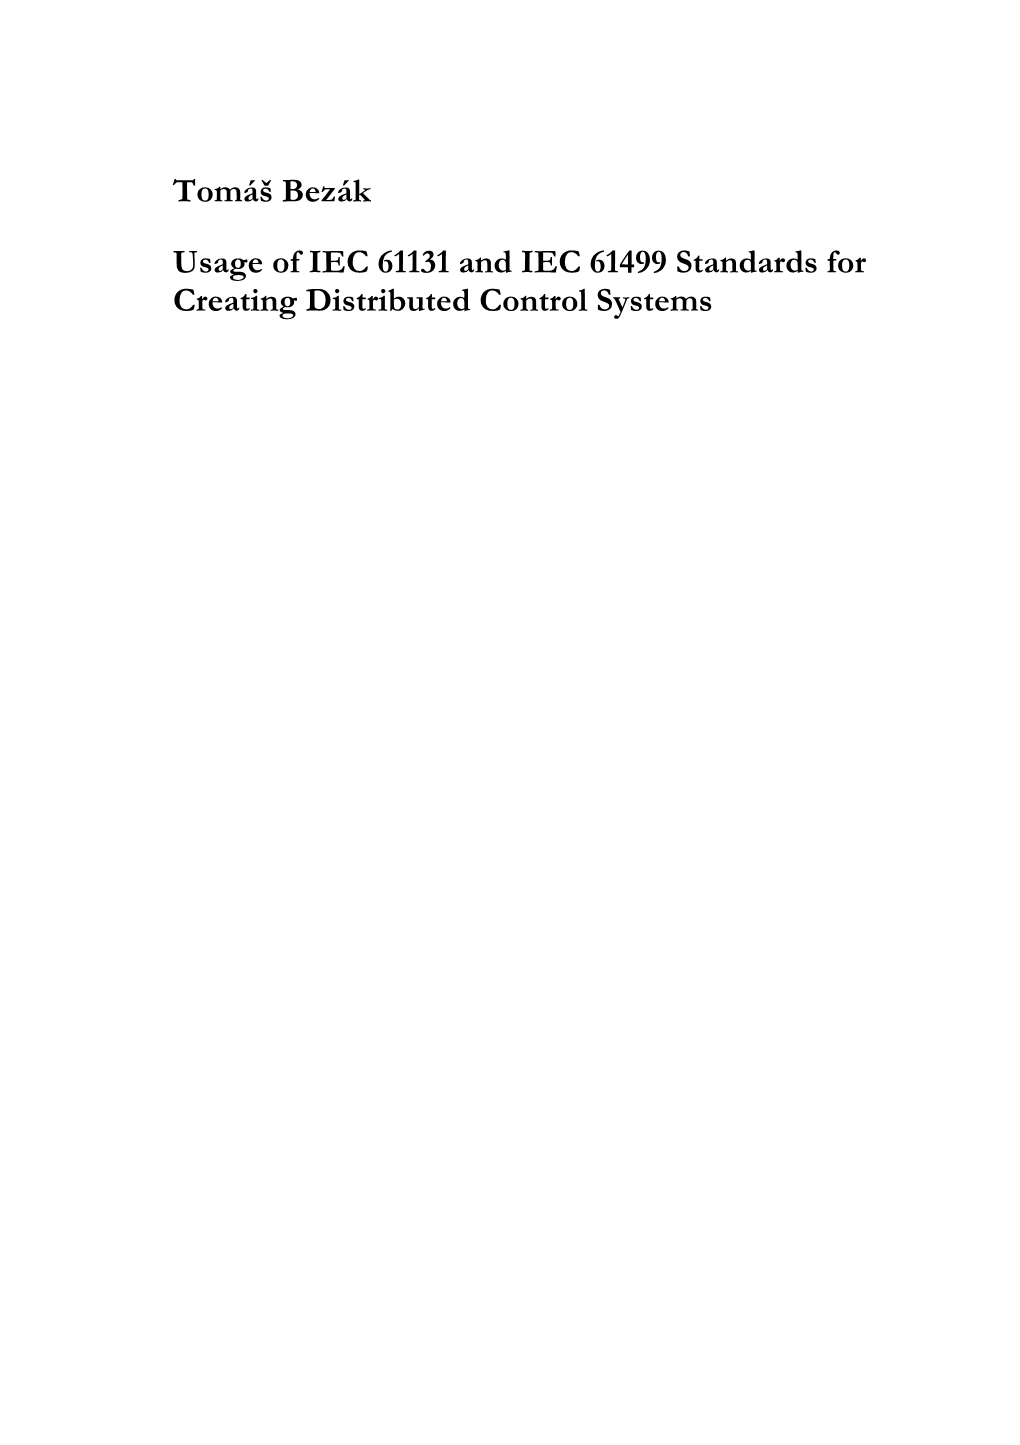 Usage of IEC 61131 and IEC 61499 Standards for Creating Distributed Control Systems